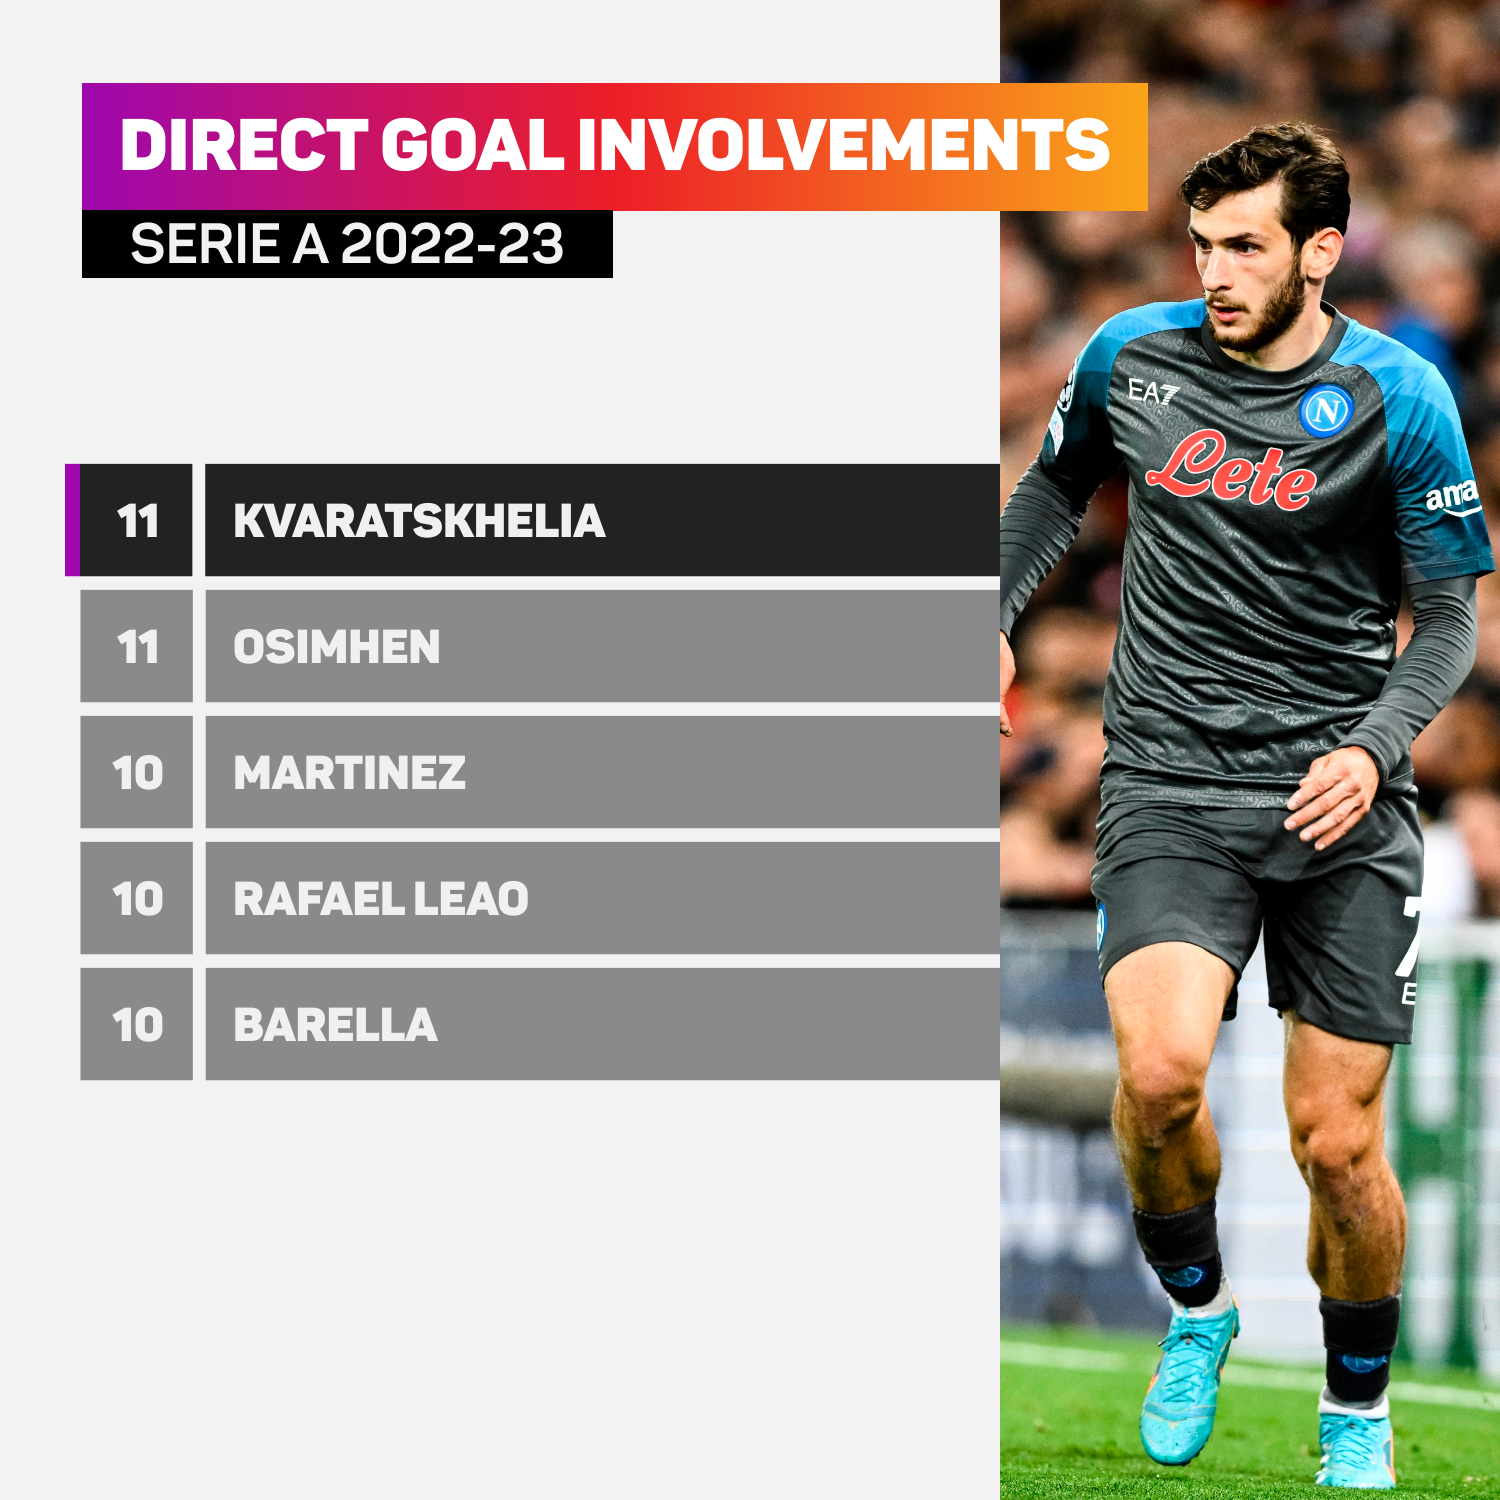 Serie A direct goal involvements 2022-23